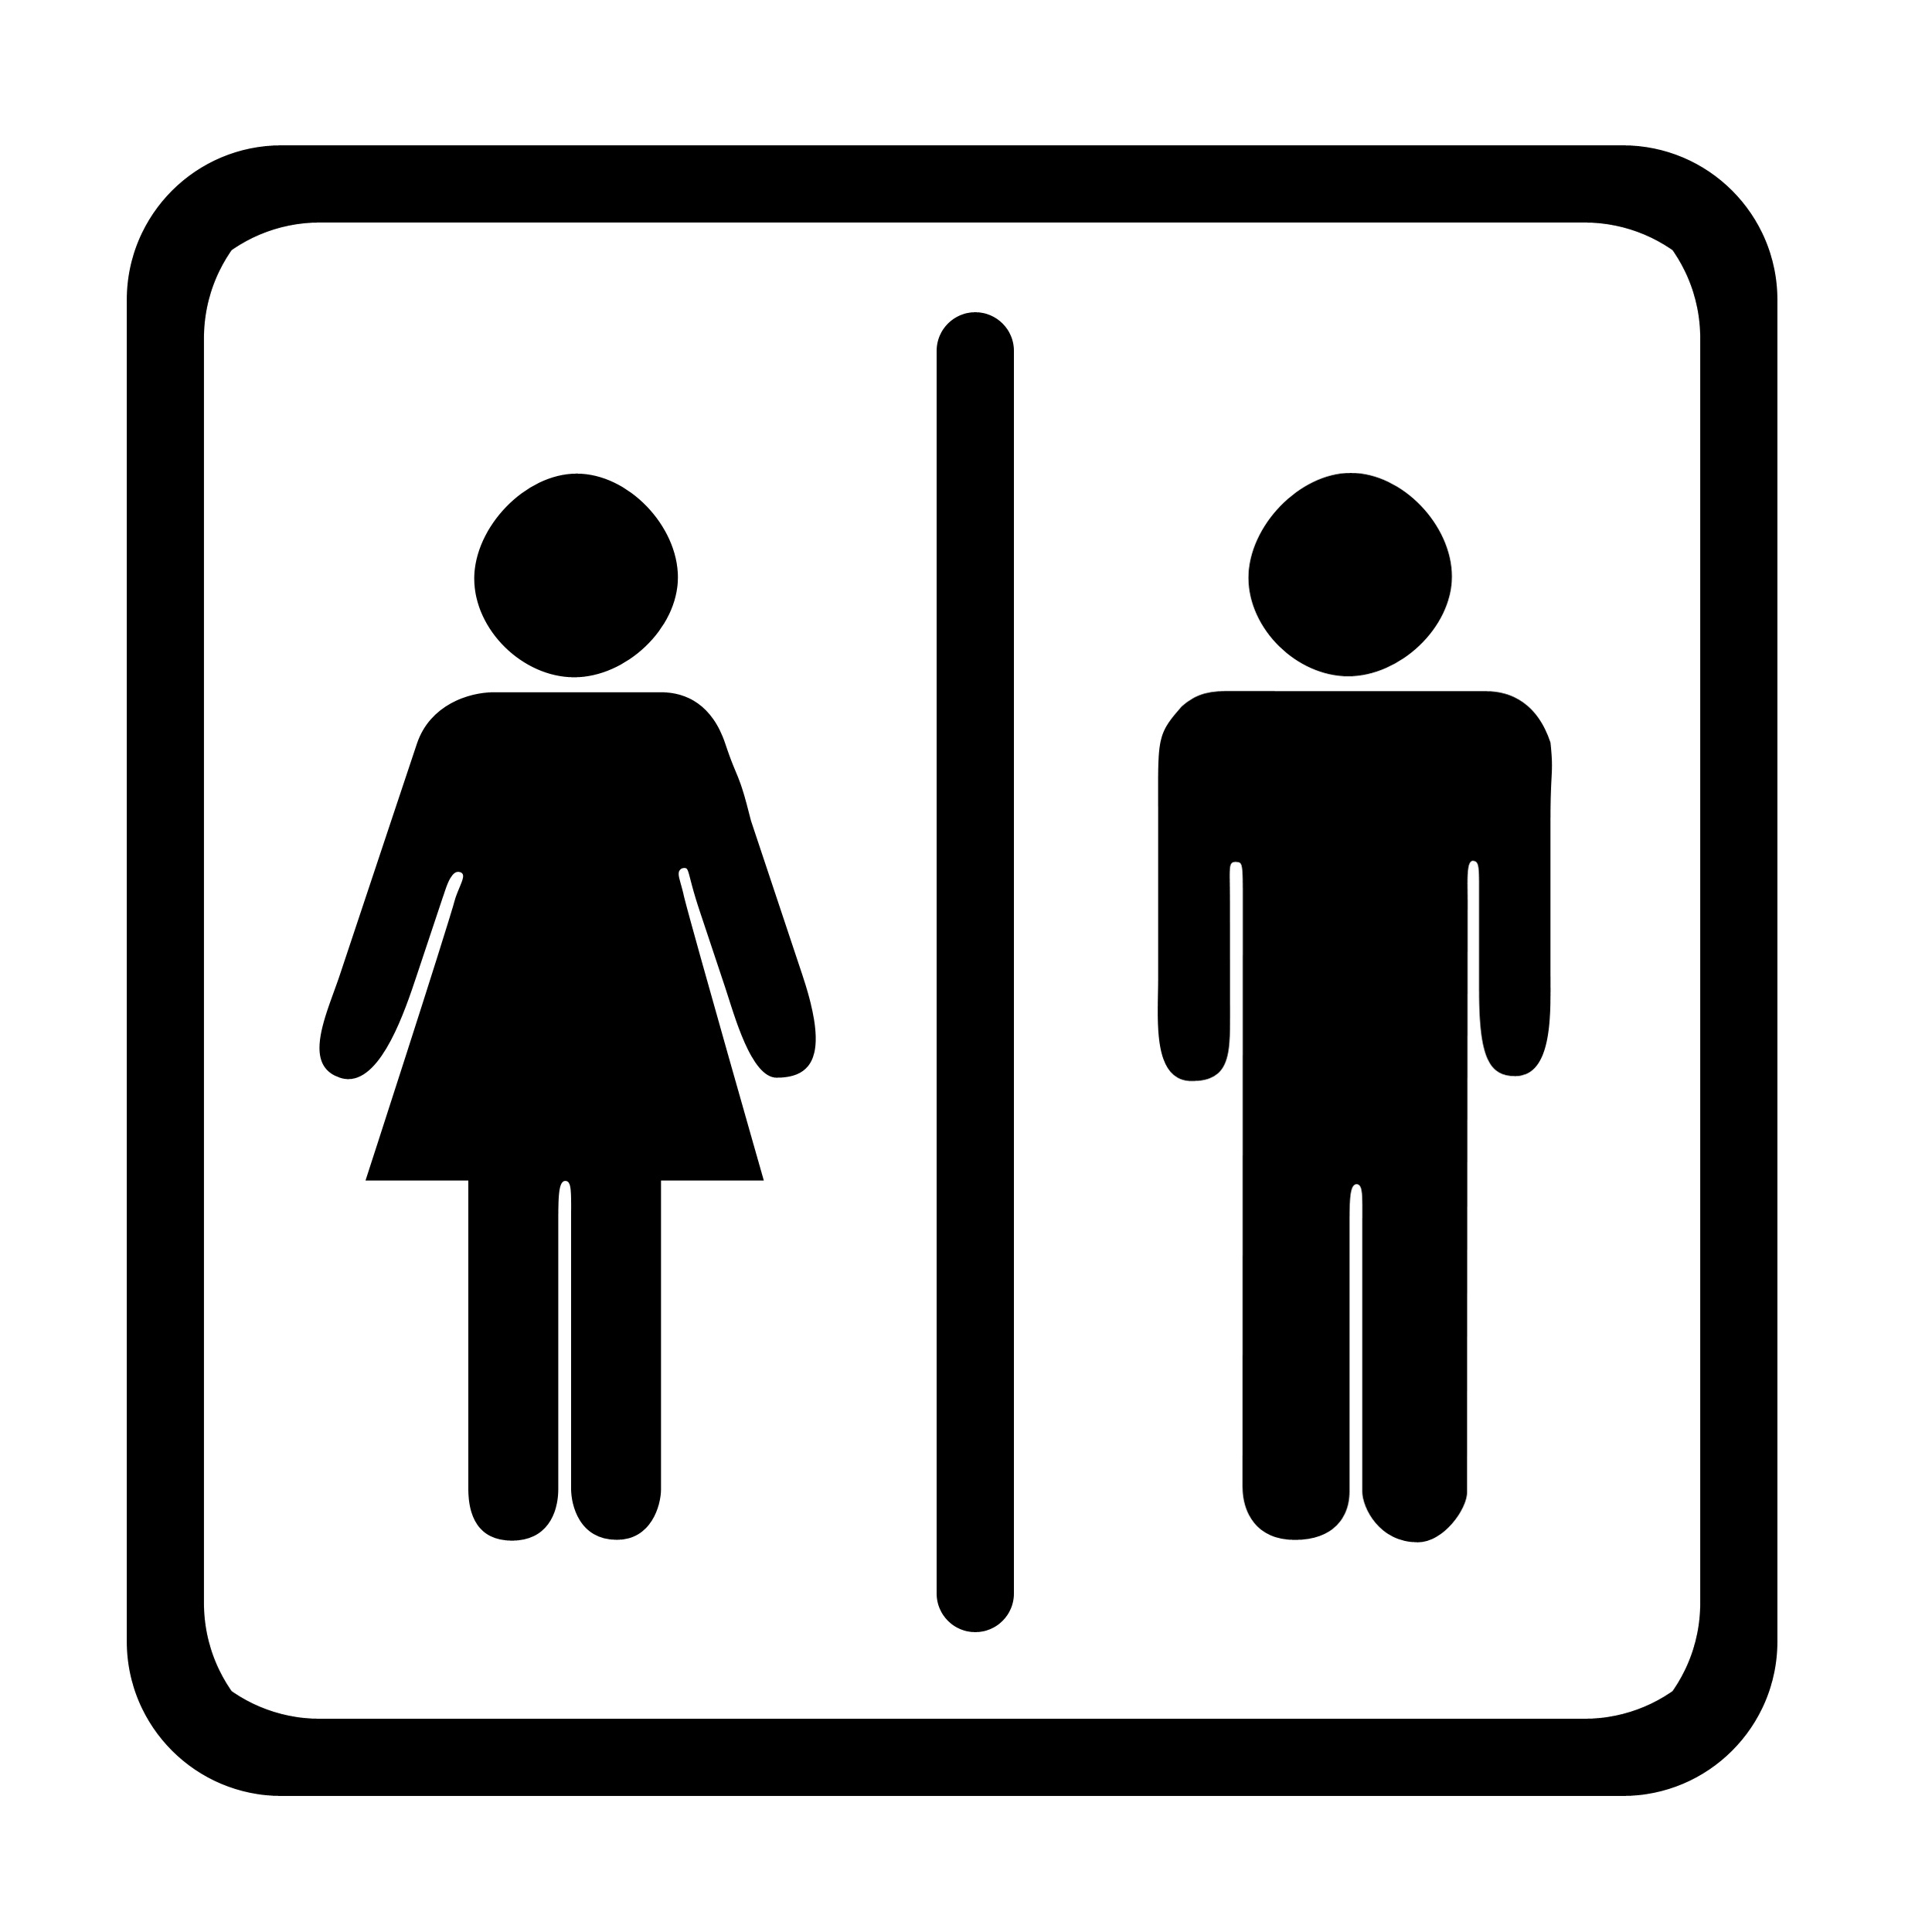 Female Wc Sign Vector. Woman And Man Silhouettes For Wc Or ...